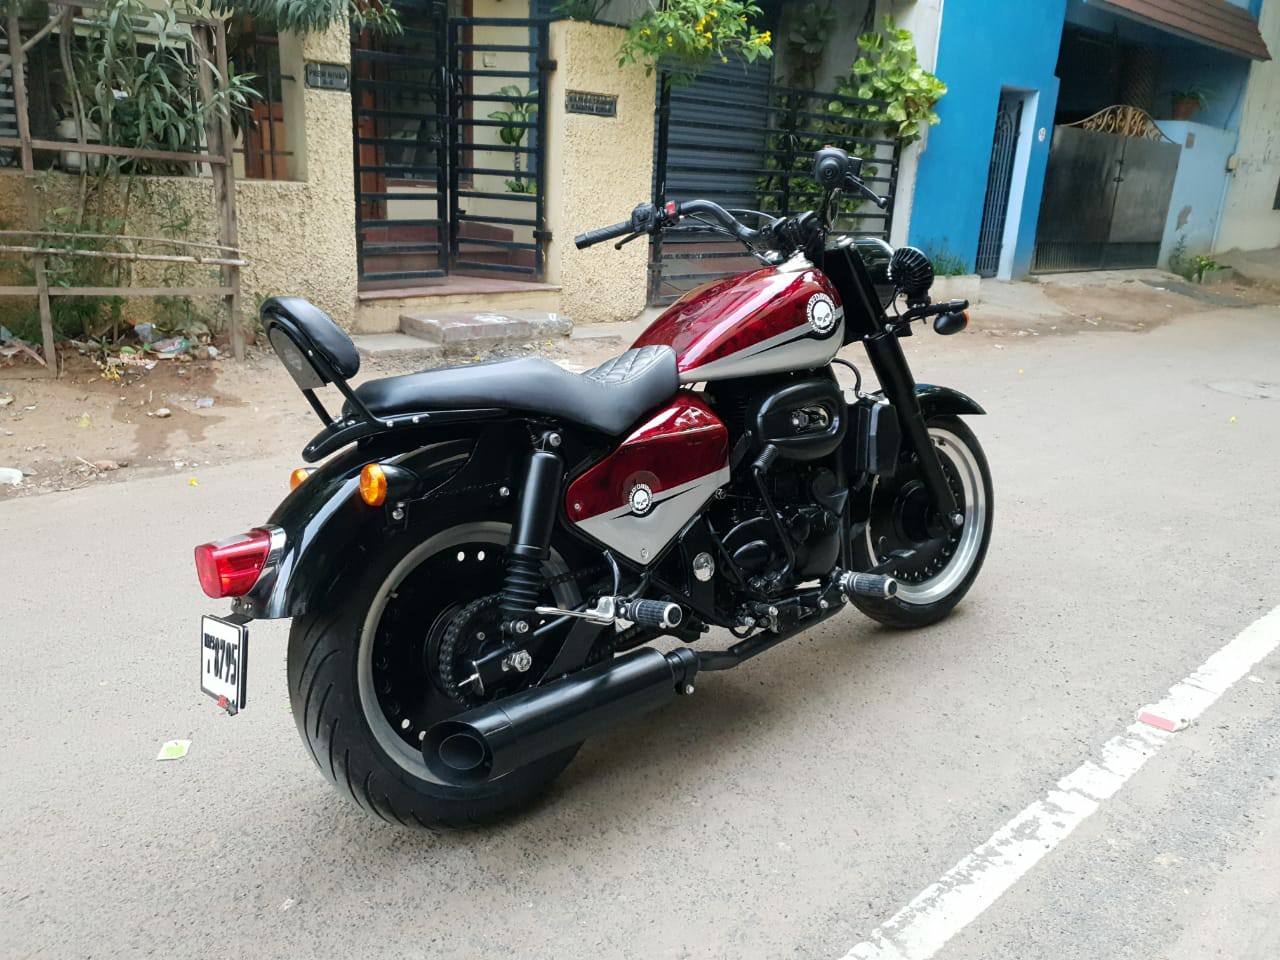 This Royal Enfield Classic 350 is a Harley Davidson Fat Boy wannabe